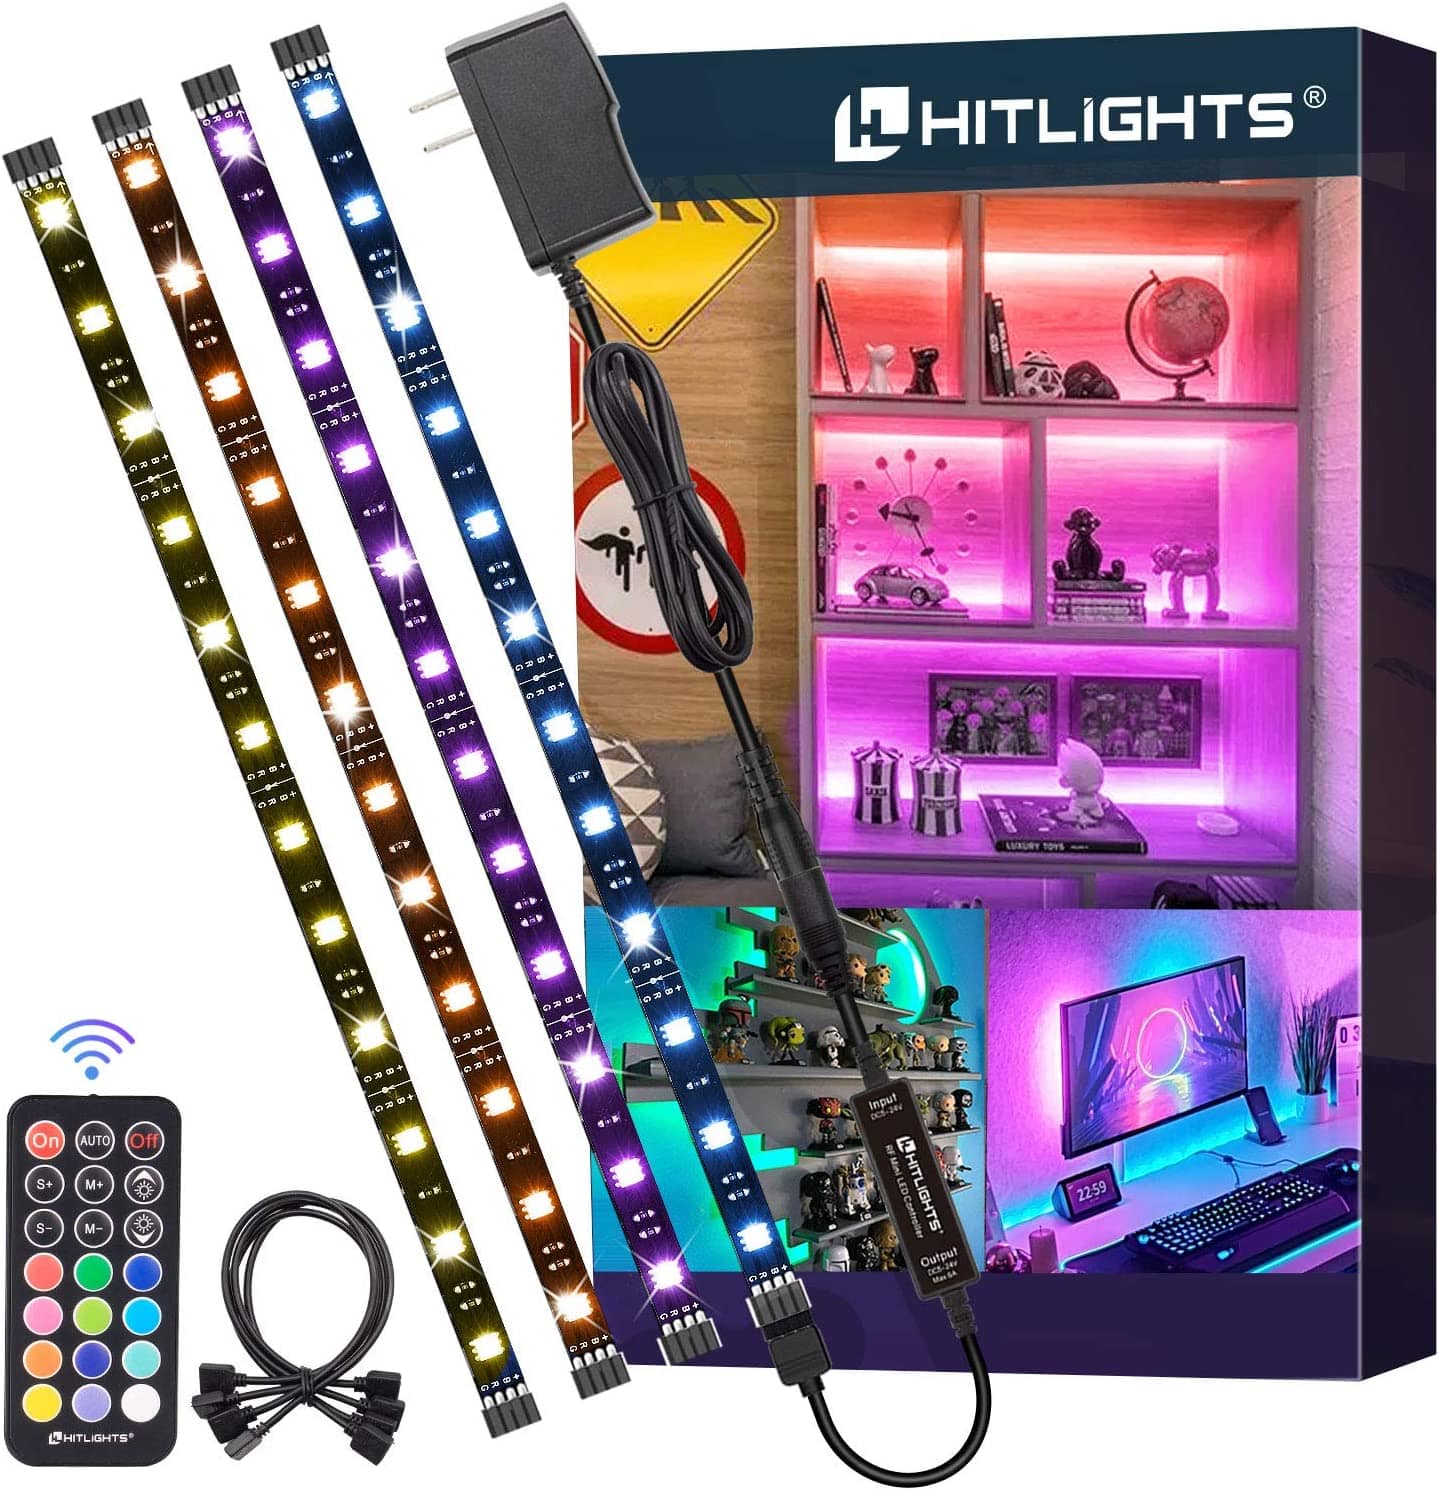 LED Strip Lights, Hitlights 4 Pre-Cut 1ft/4ft Small LED Light Strips Dimmable, RGB 5050 Color Changing LED Tape Light with Remote and UL-Listed